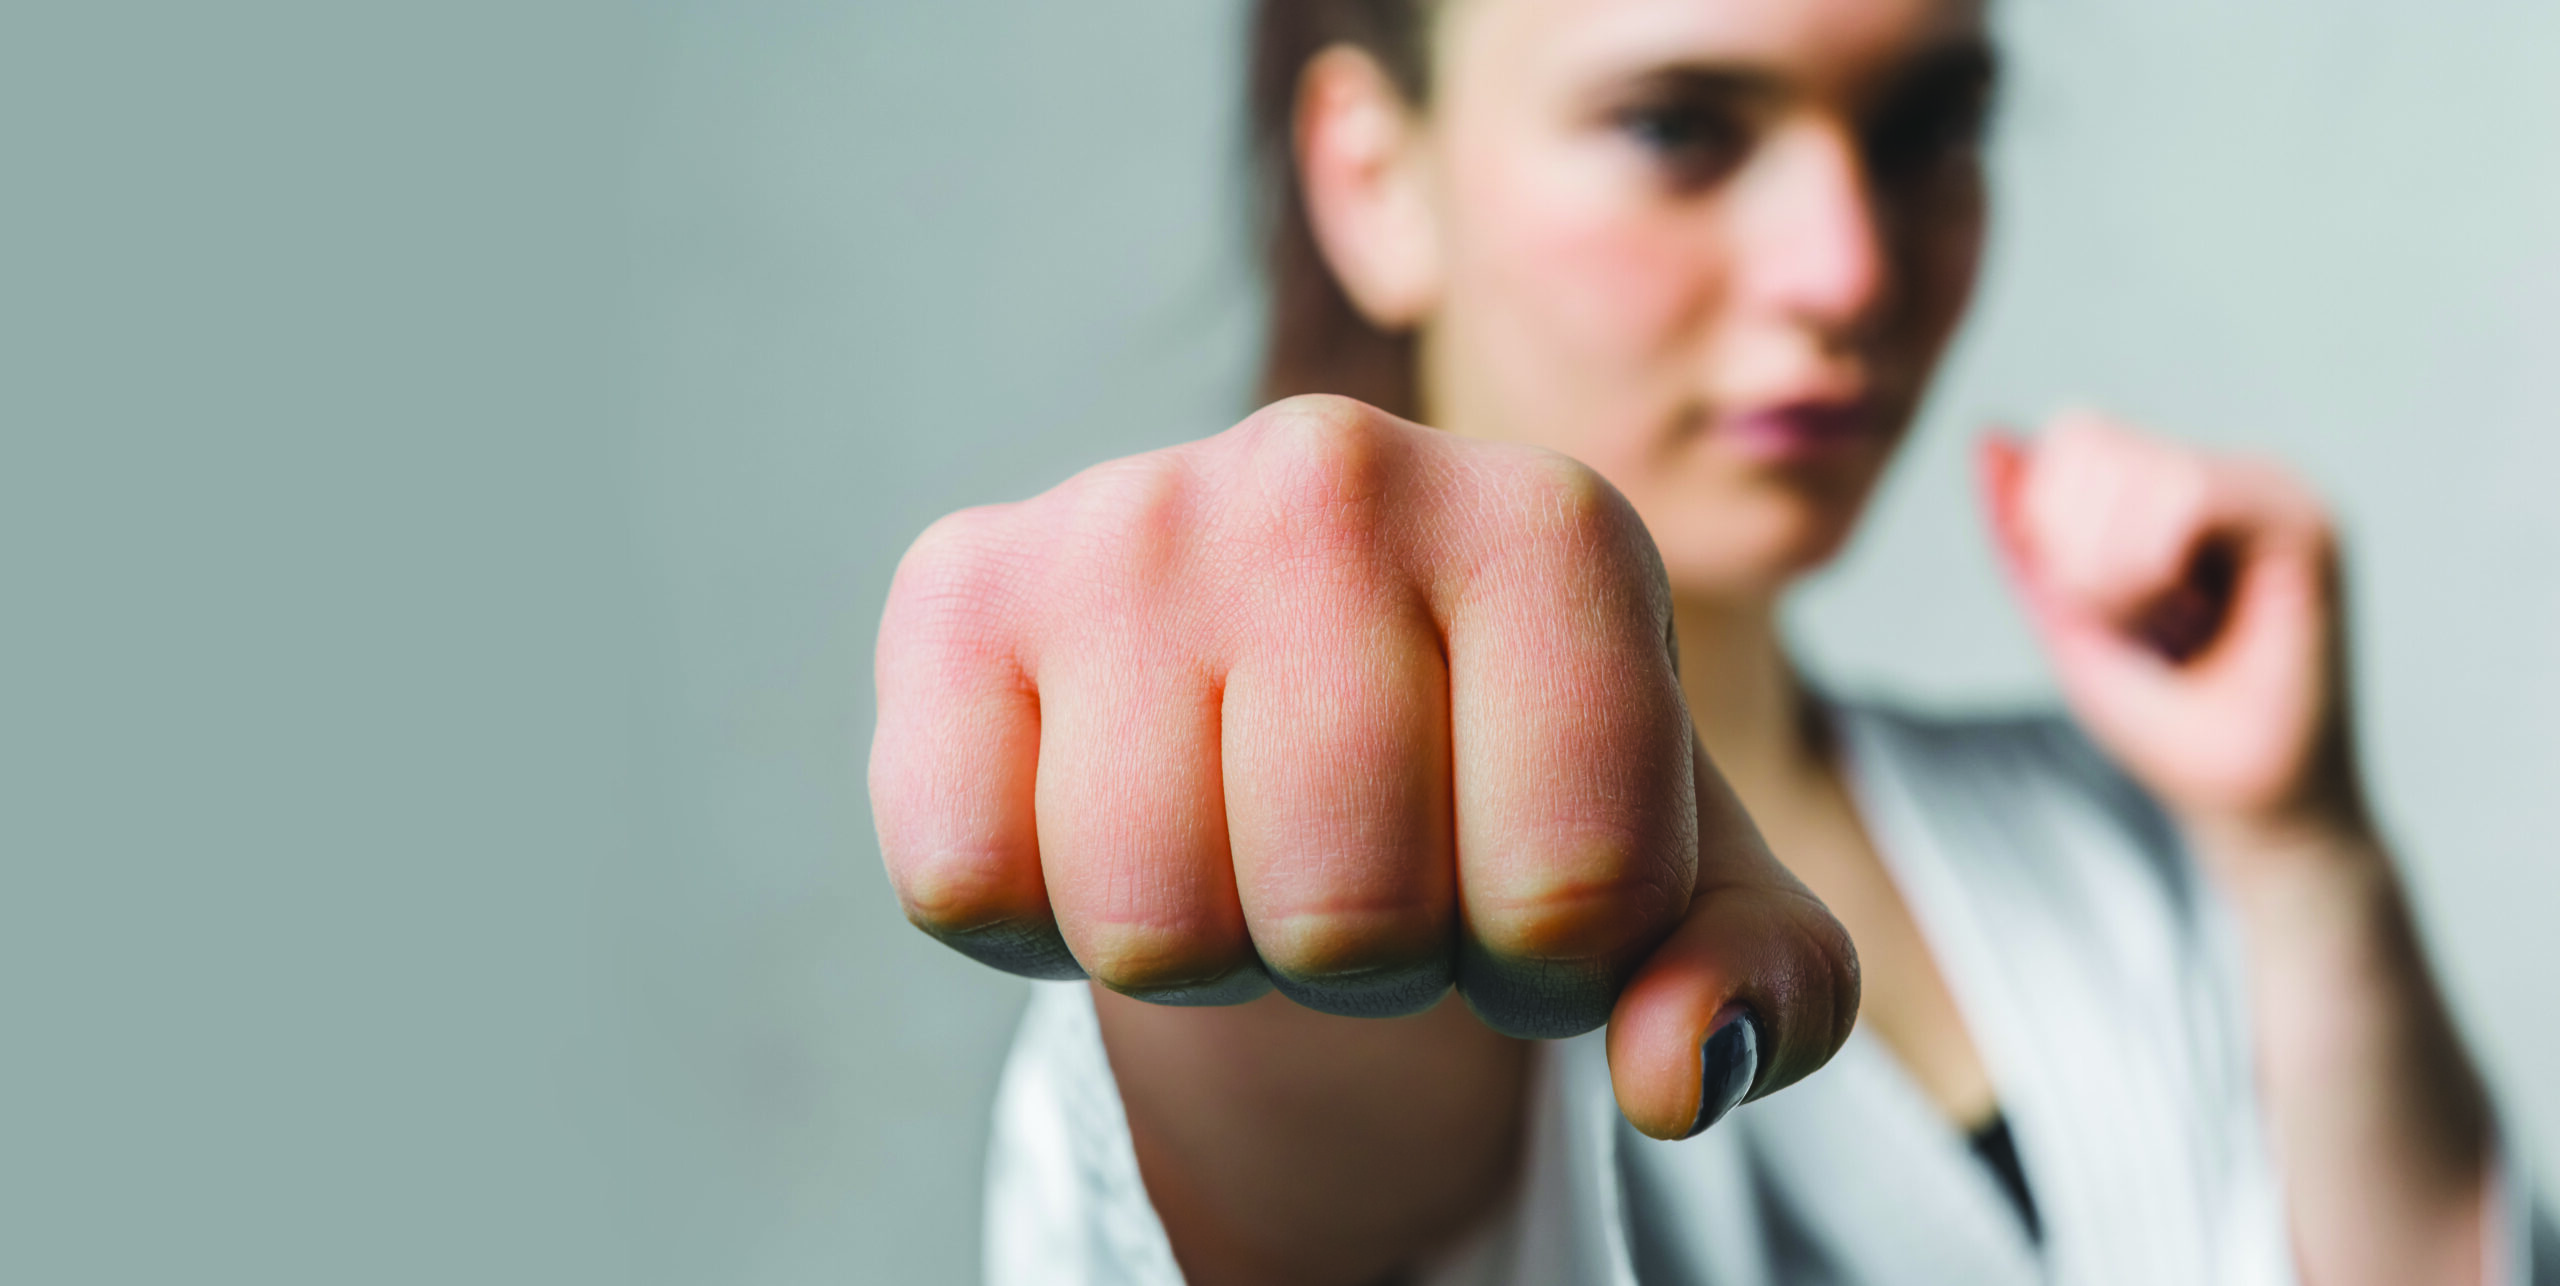 Empower Yourself: Self Defense Fundamentals for the Real World